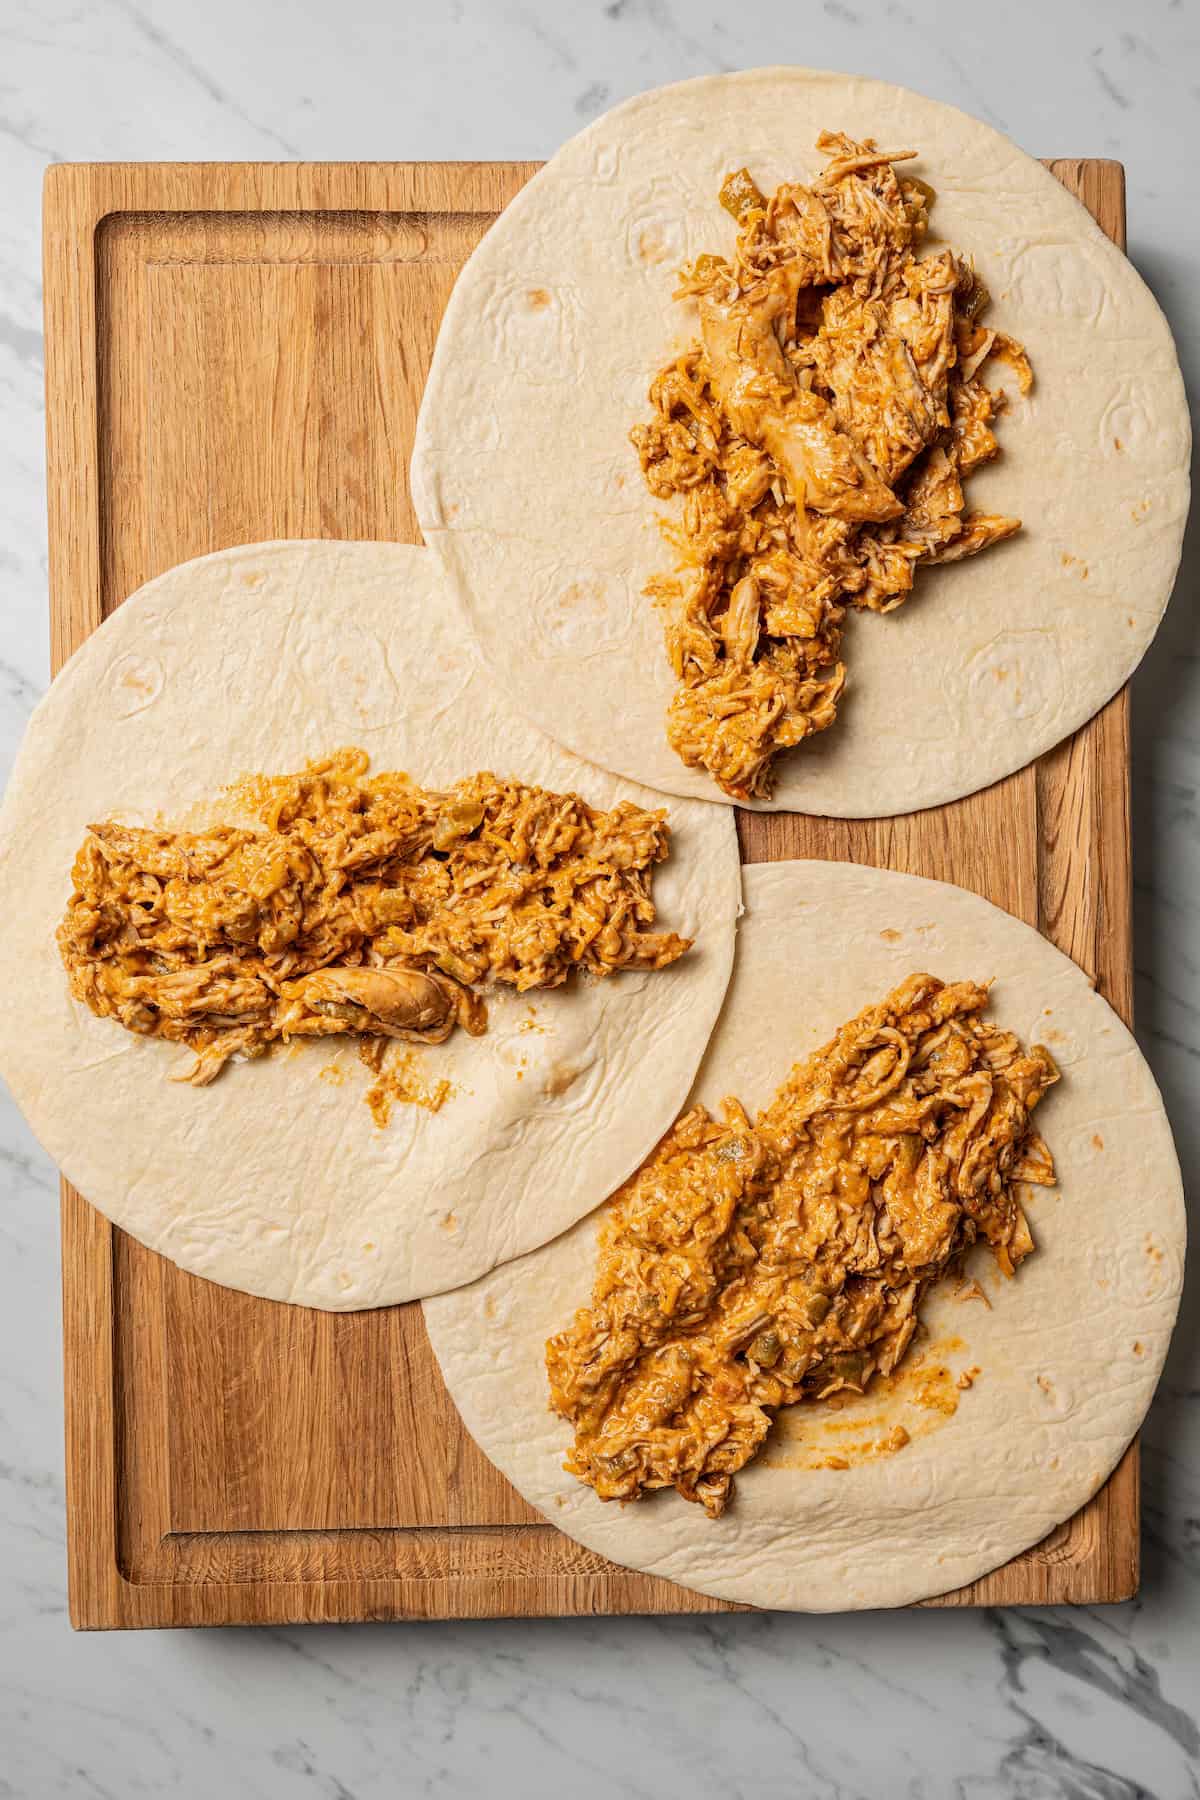 Overhead view of three flour tortillas topped with chicken filling on a wooden cutting board.